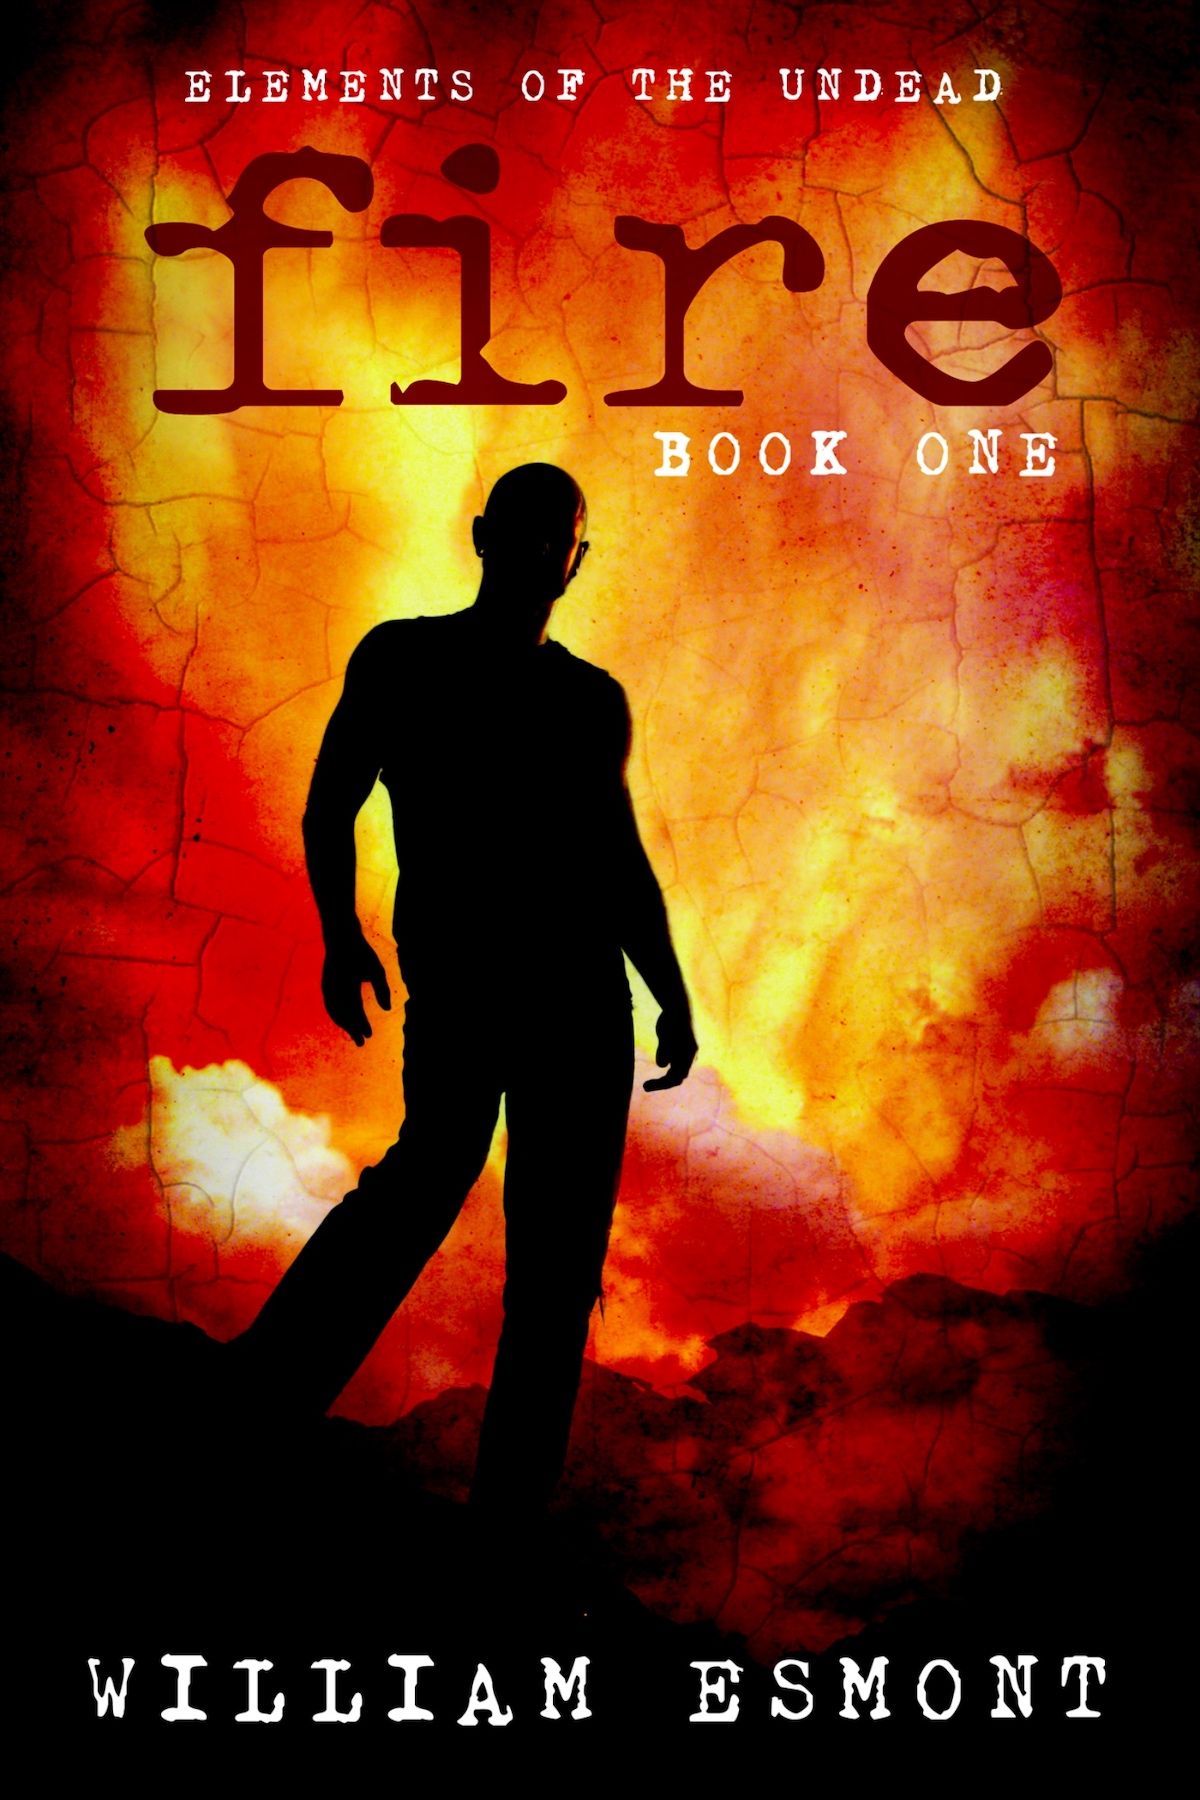 Silhouetted man standing before background filled with fire